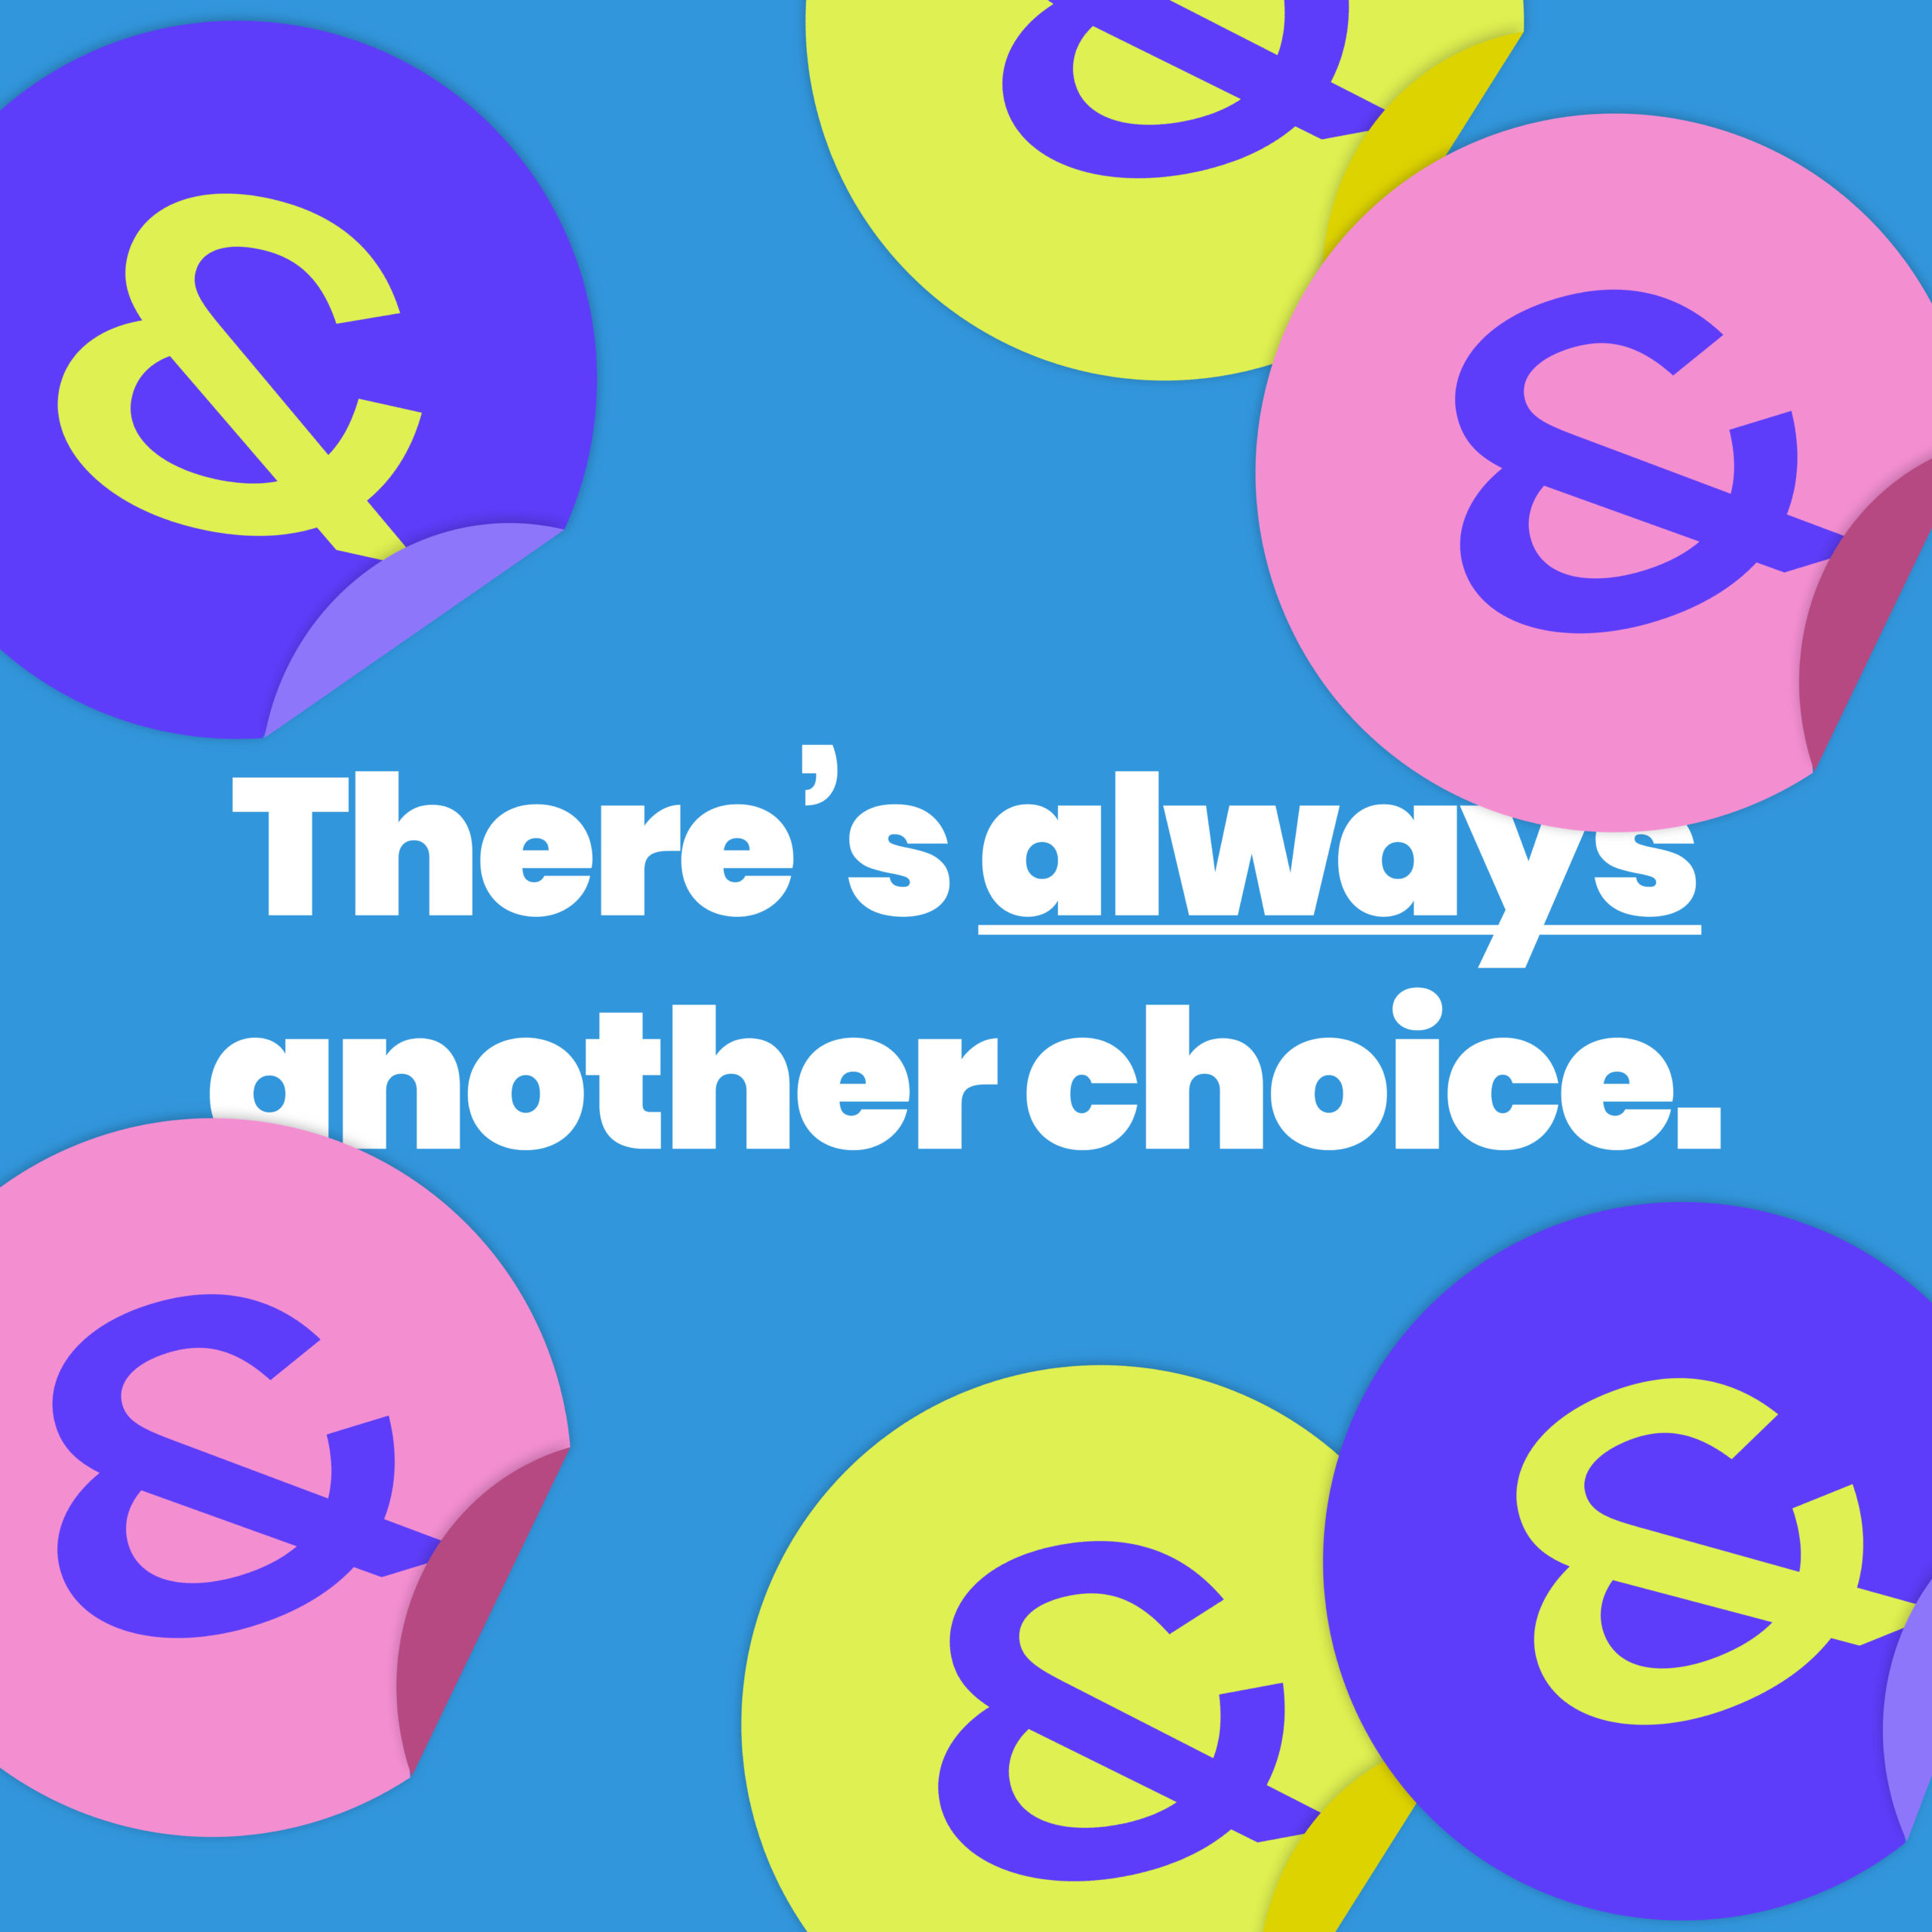 Blue background bordered by yellow, pink and purple ampersands. In the middle is copy that says, "There's always another choice."